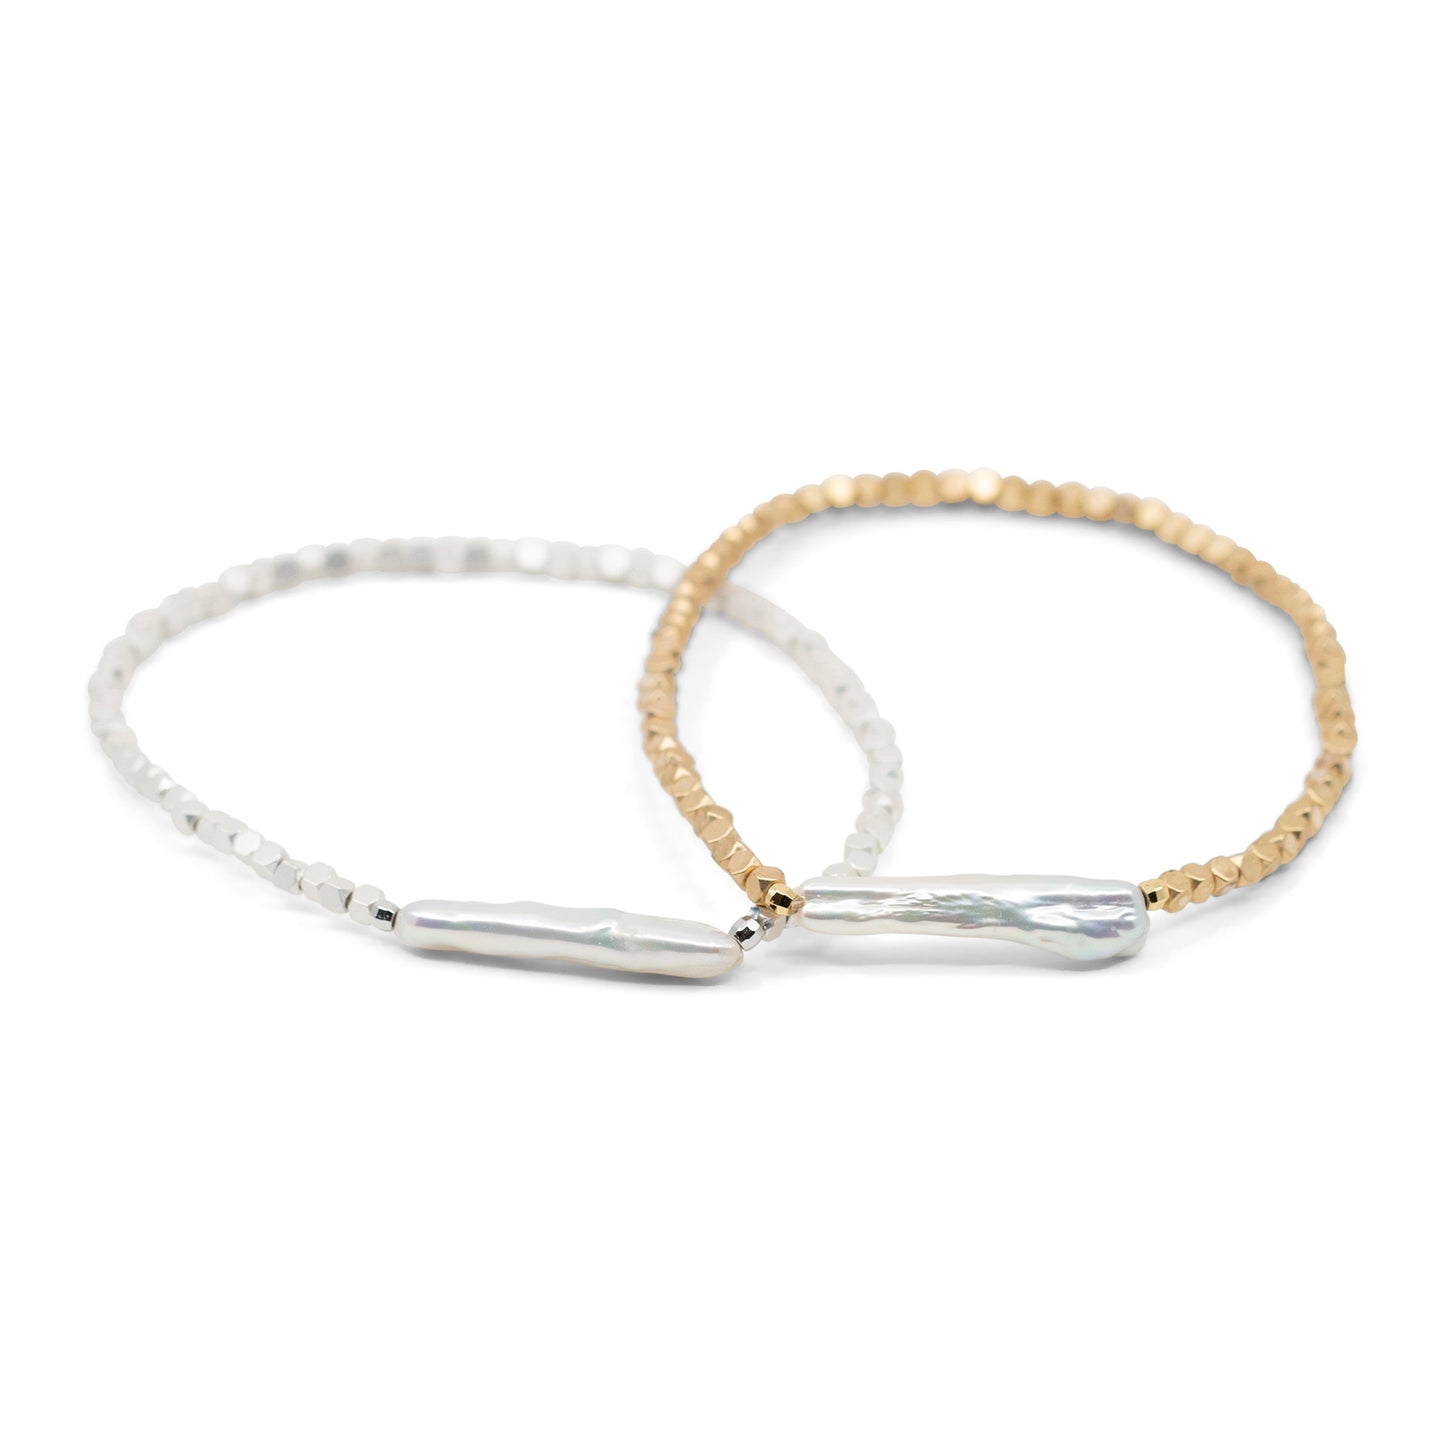 Dawes - Bead and Freshwater Stick Pearl Stretch Bracelet